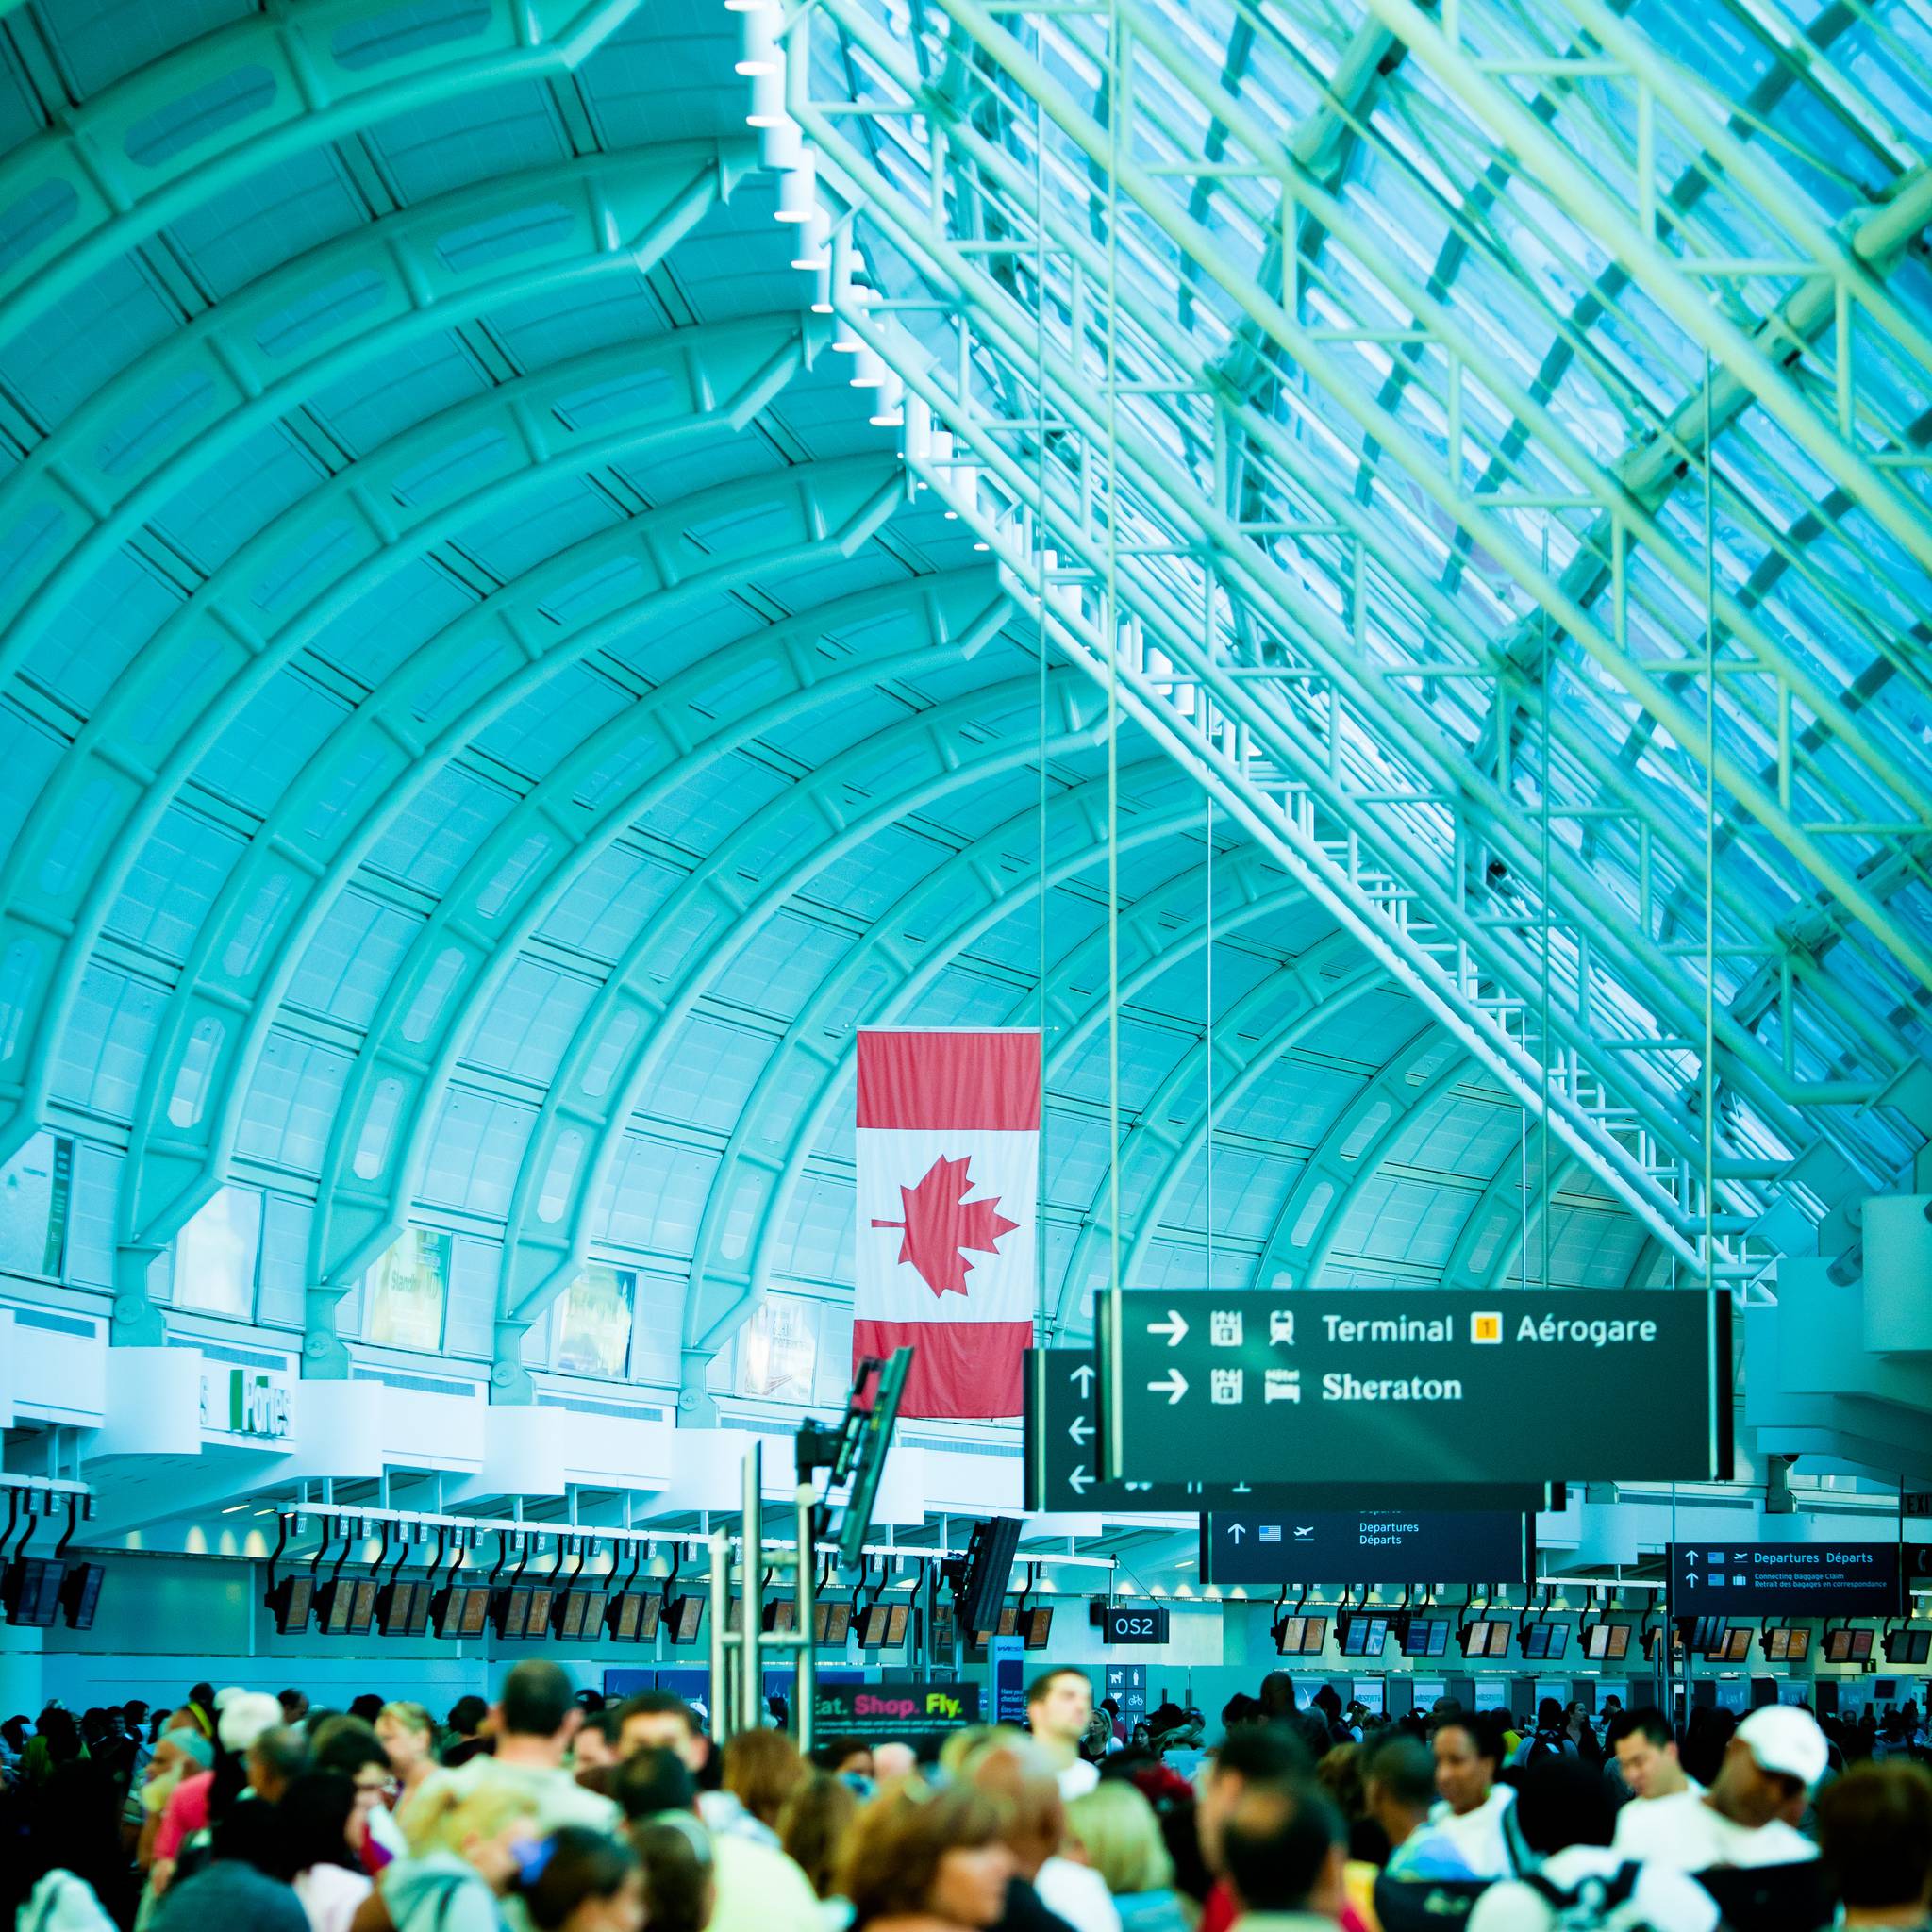 Air Canada taps into Americans’ anxieties